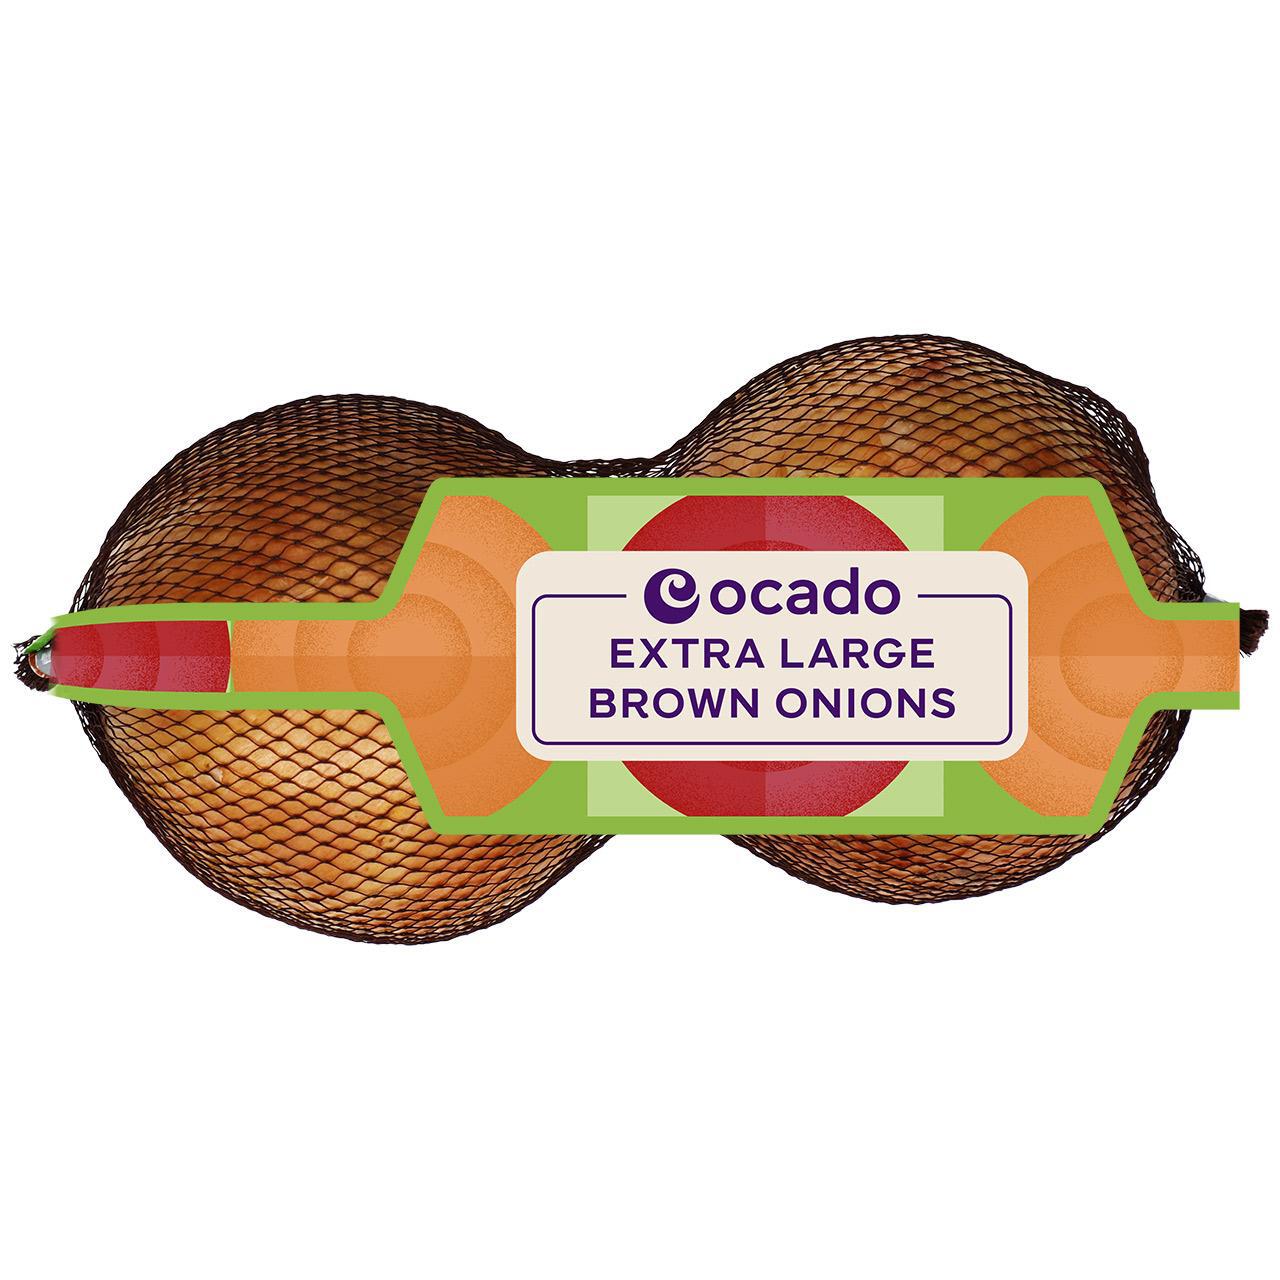 Ocado Extra Large Brown Onions 2 per pack